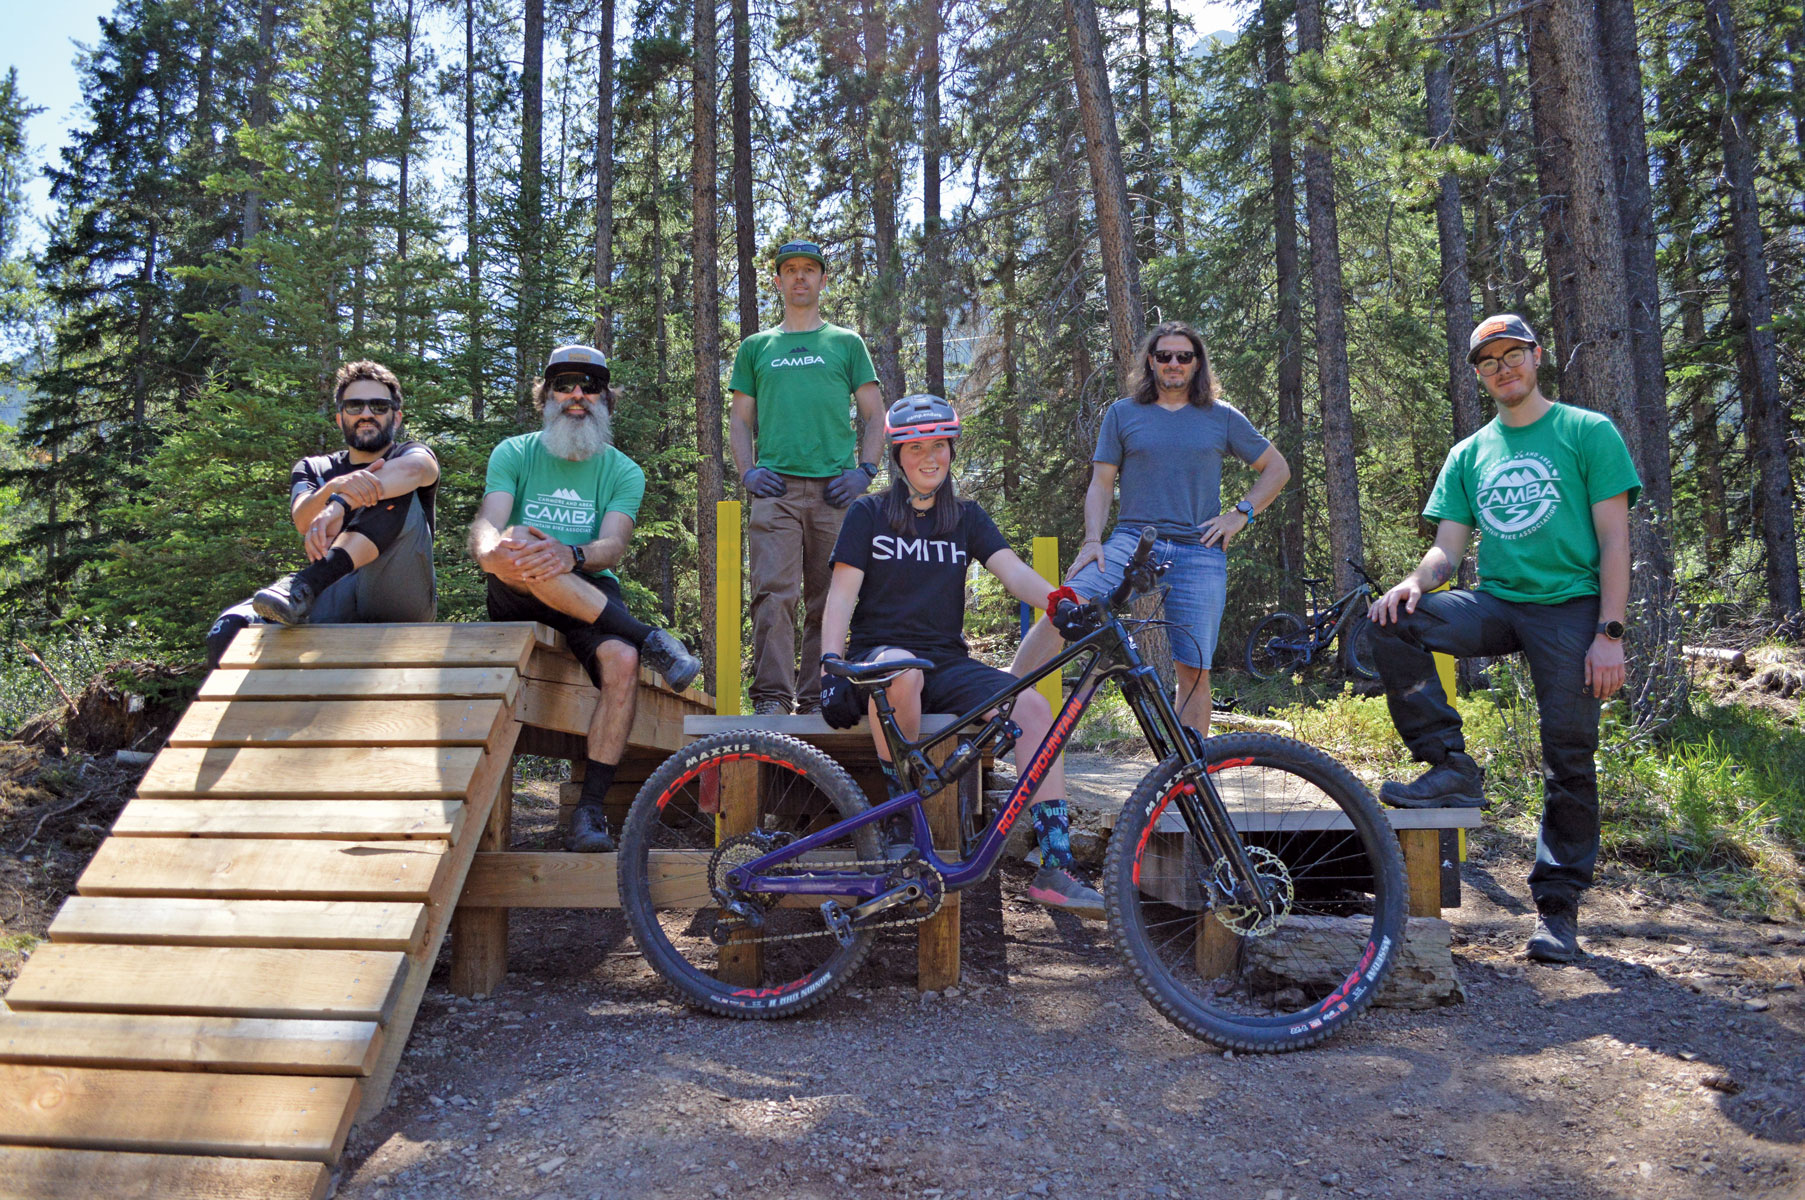 CAMBA trail crew, with a few board members, opening up a new drop zone at Quarry Lake Park. L to R: Justin Deoliveira, Chad Holowatuk, Andrew Dickison, Clara Bown, Andreas Comeau, Nate Gerwing. Photo by Jordan Small